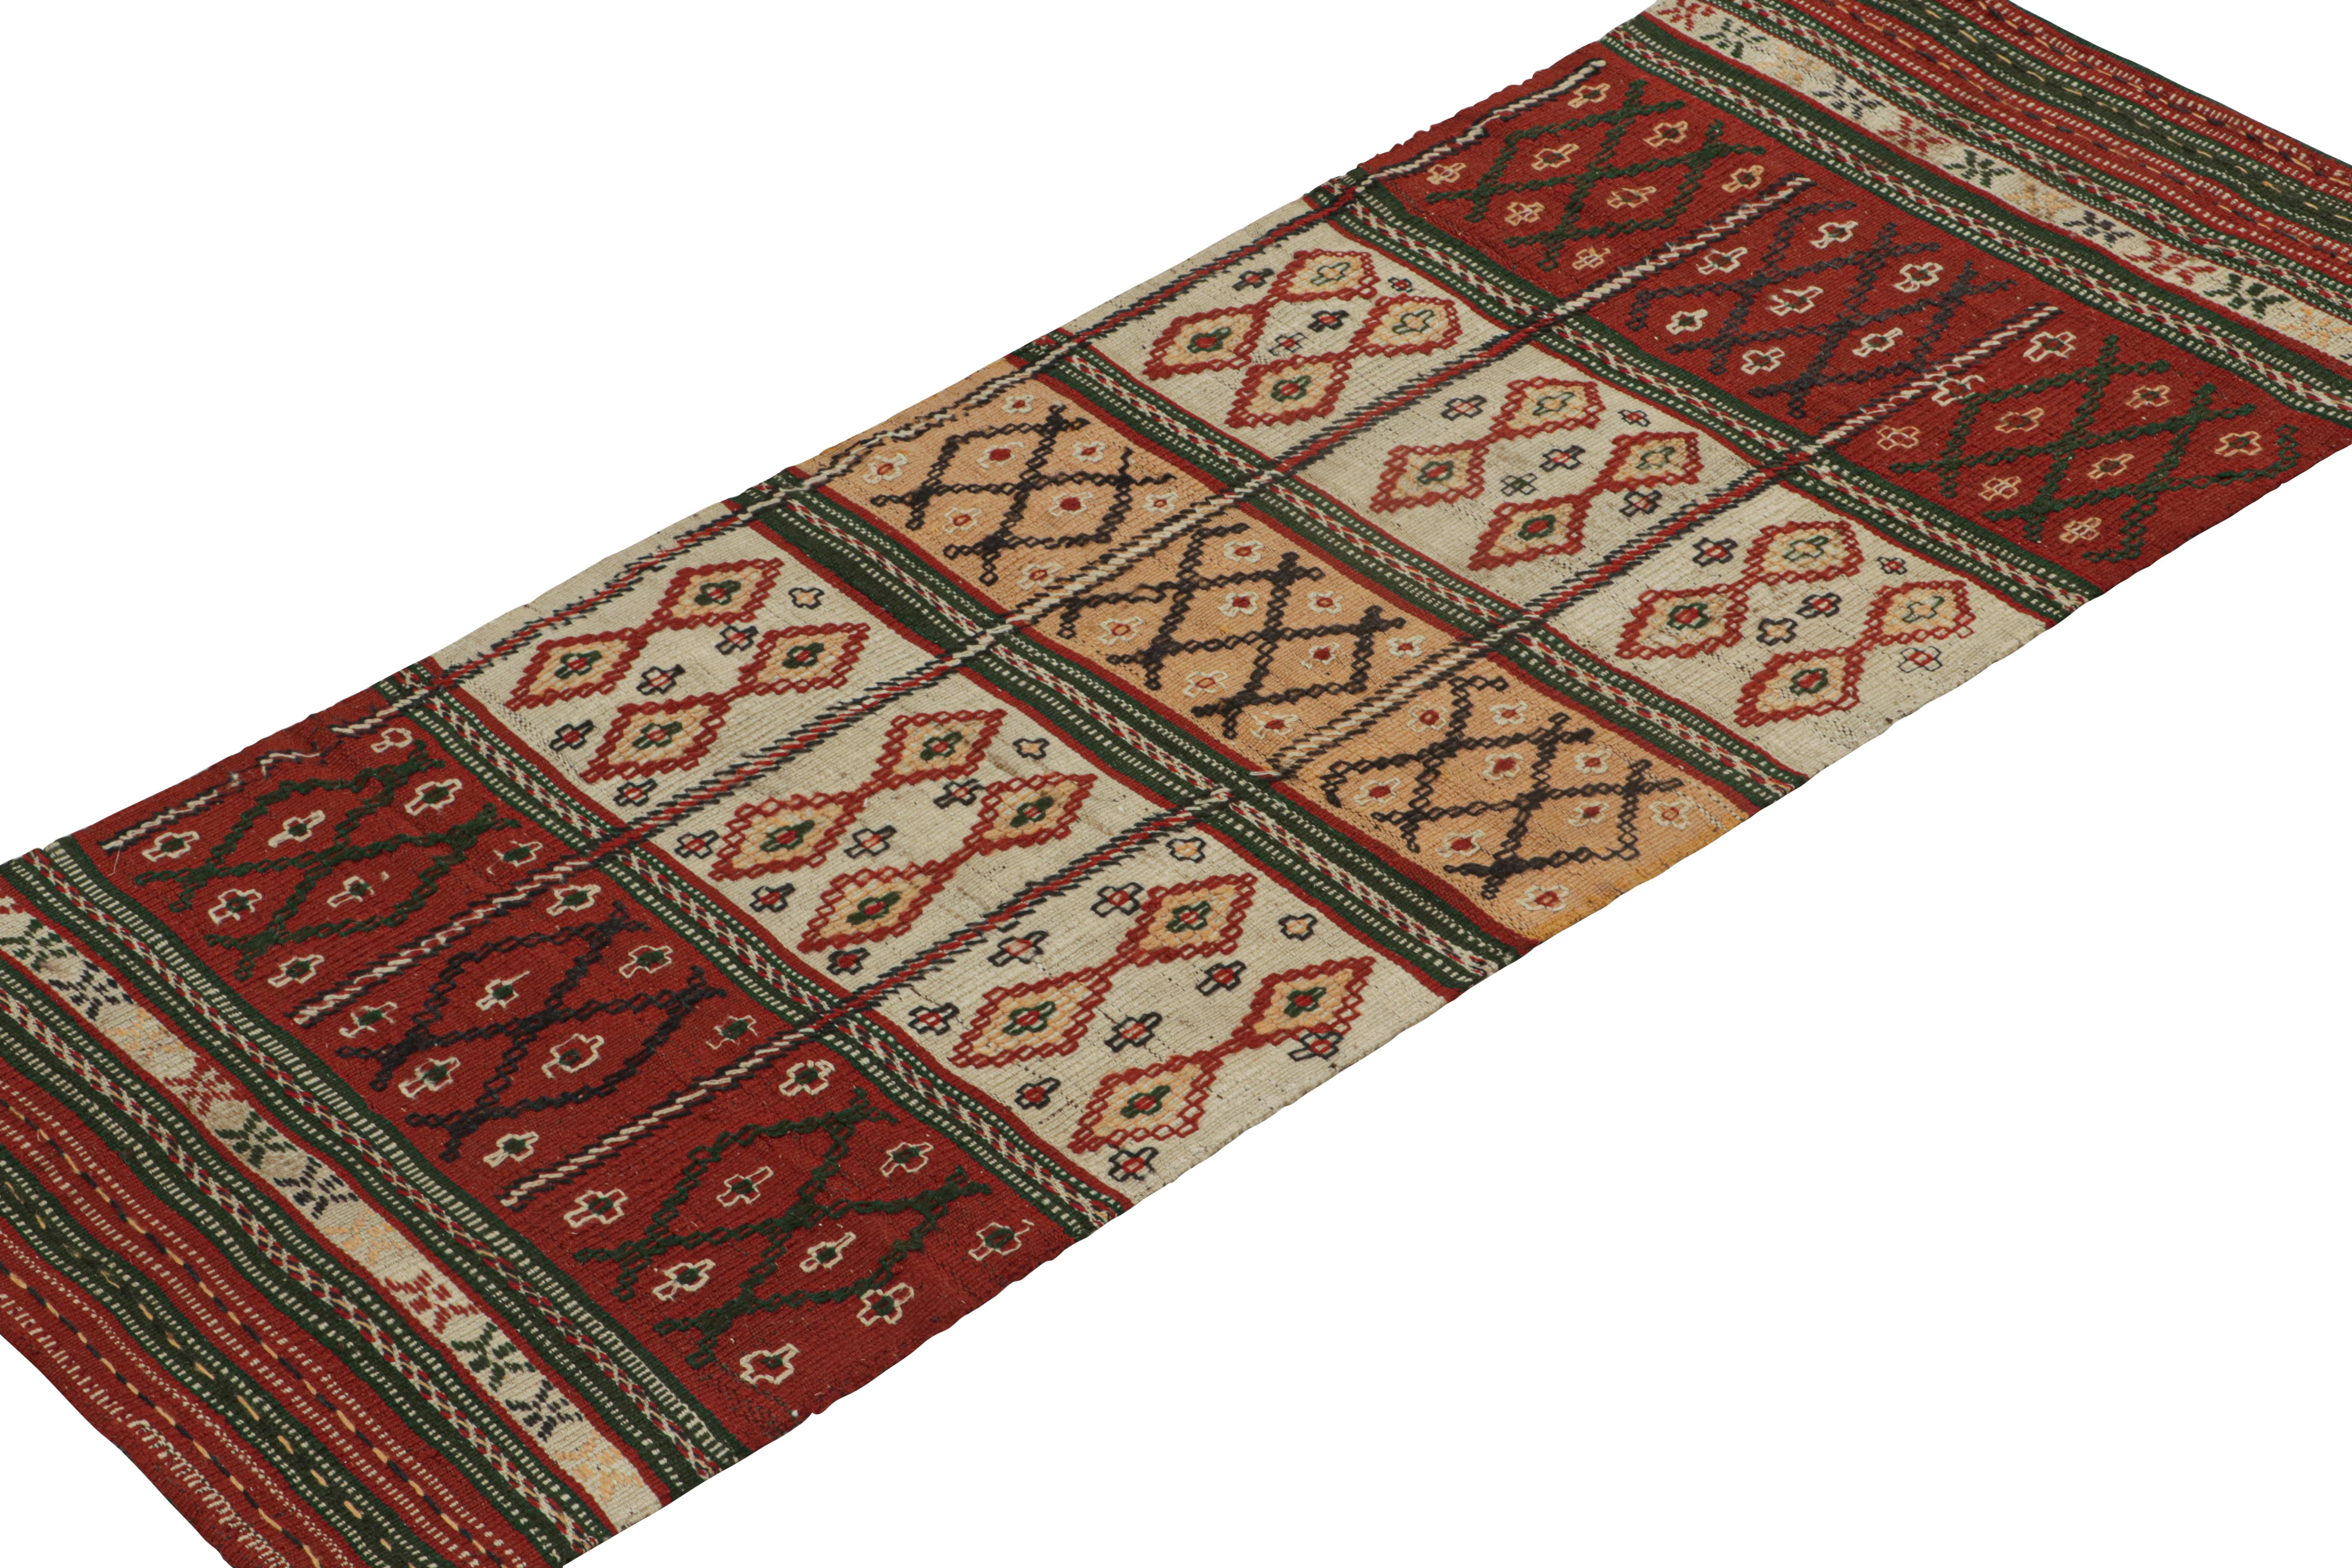 Tribal Vintage Persian Kilim Runner with Geometric Patterns by Rug & Kilim For Sale